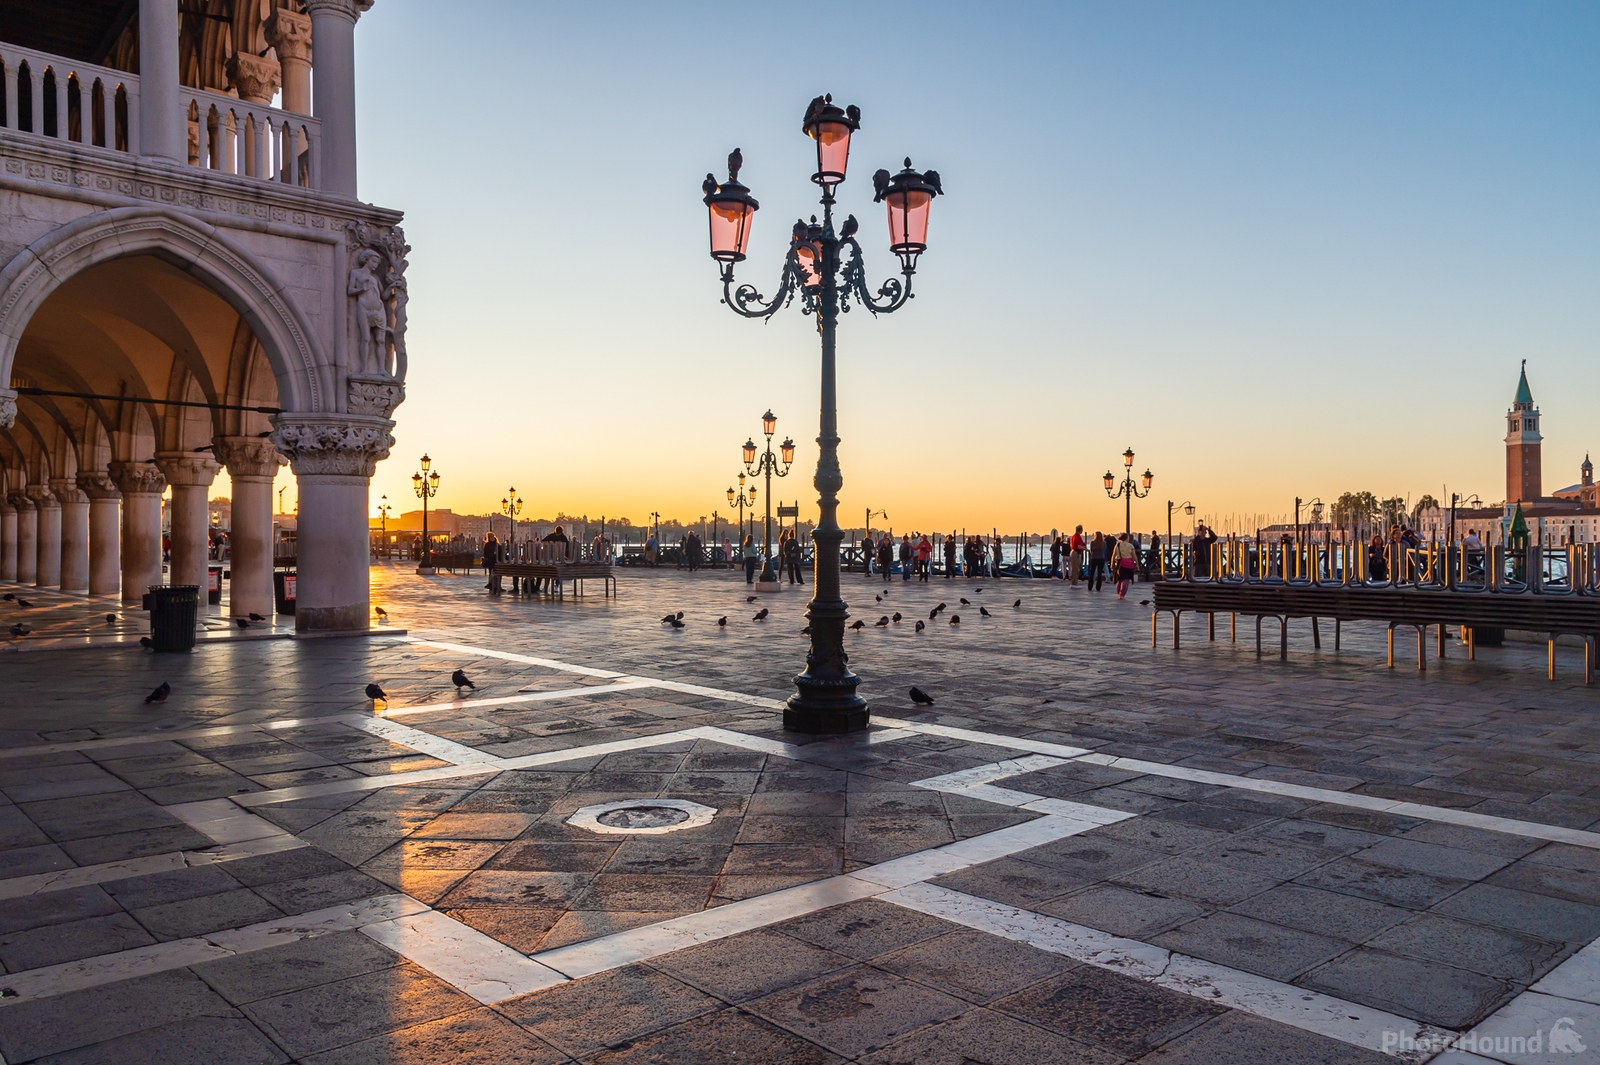 Image of Piazzetta San Marco by Sue Wolfe